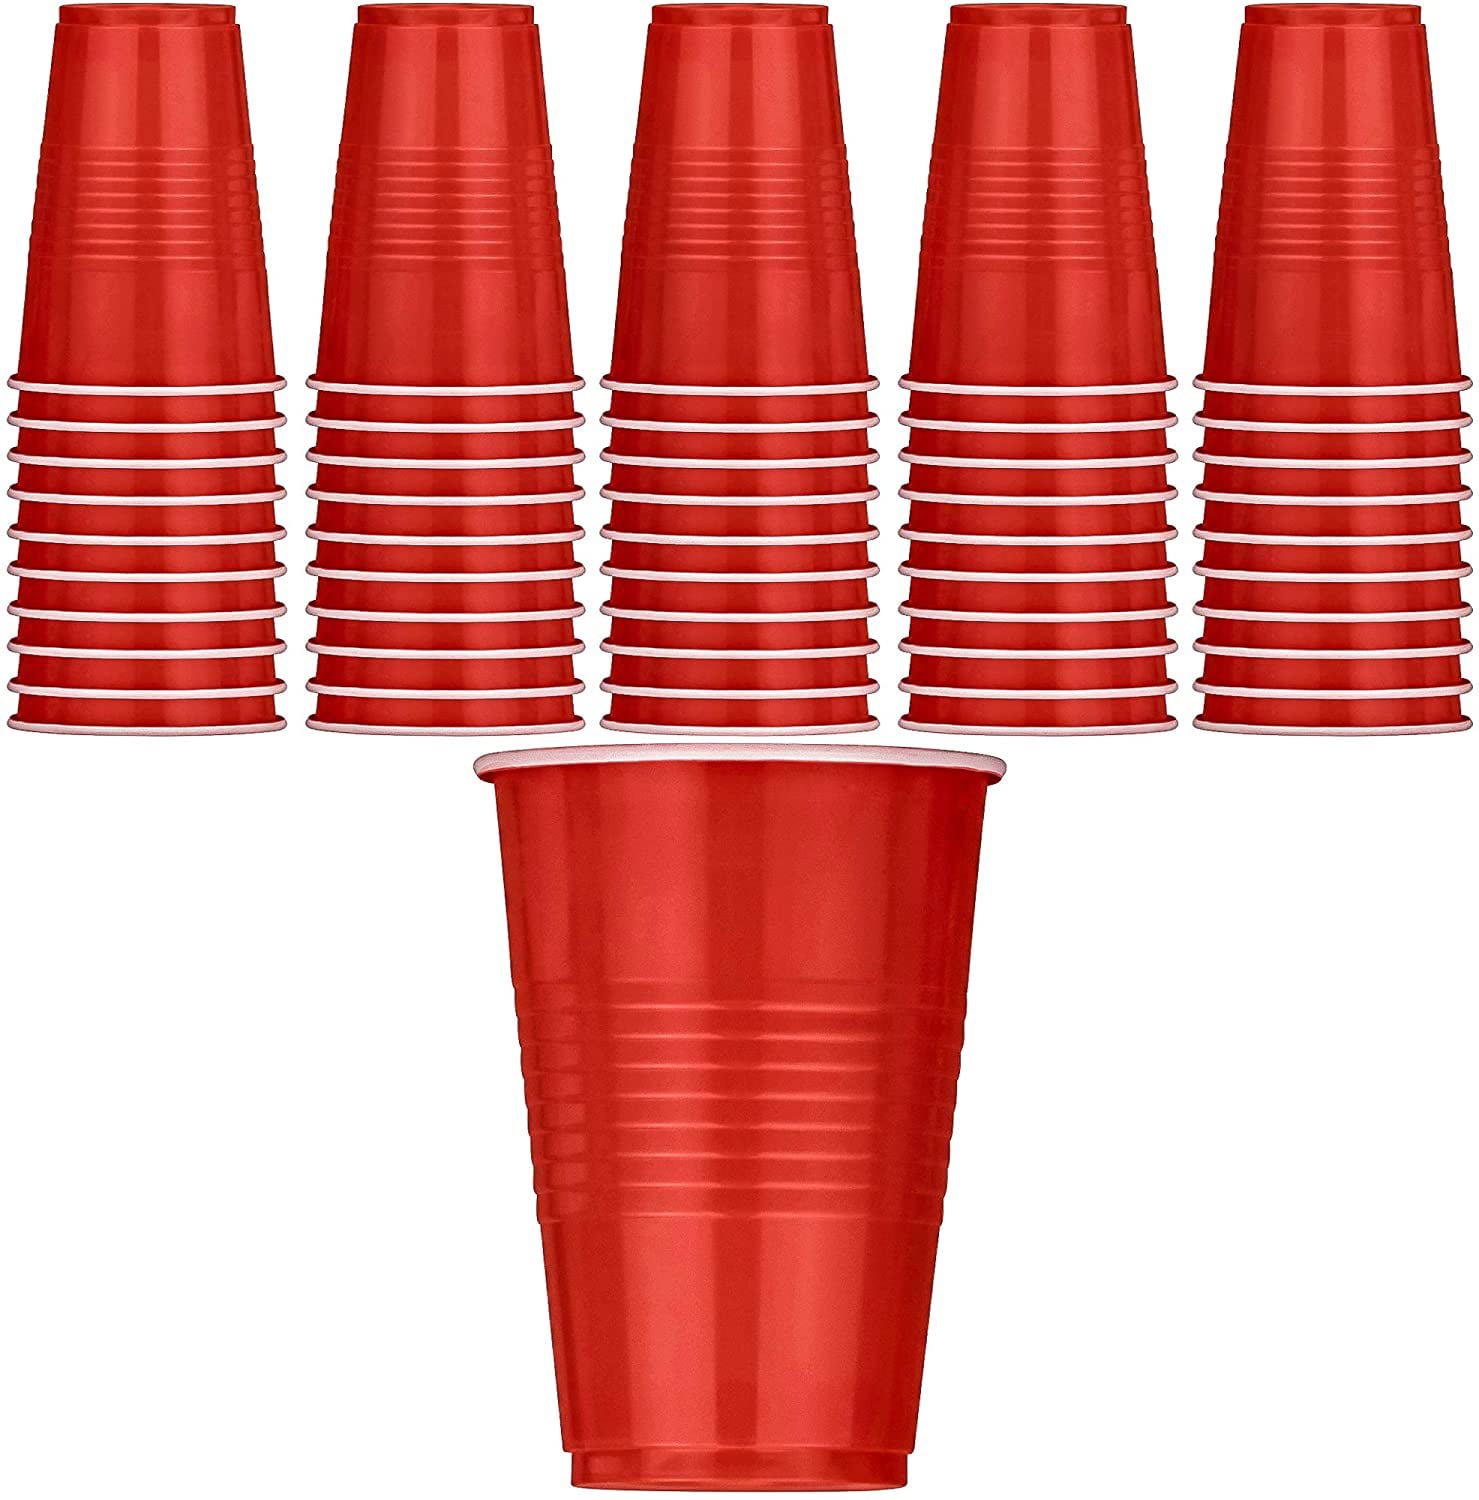 RW Base 16 Ounce Beverage Cups, 500 Disposable Glasses - Heavy Duty, Durable, Red Plastic Drinking Cups, for Birthday Parties, Picnics, or Tailgates